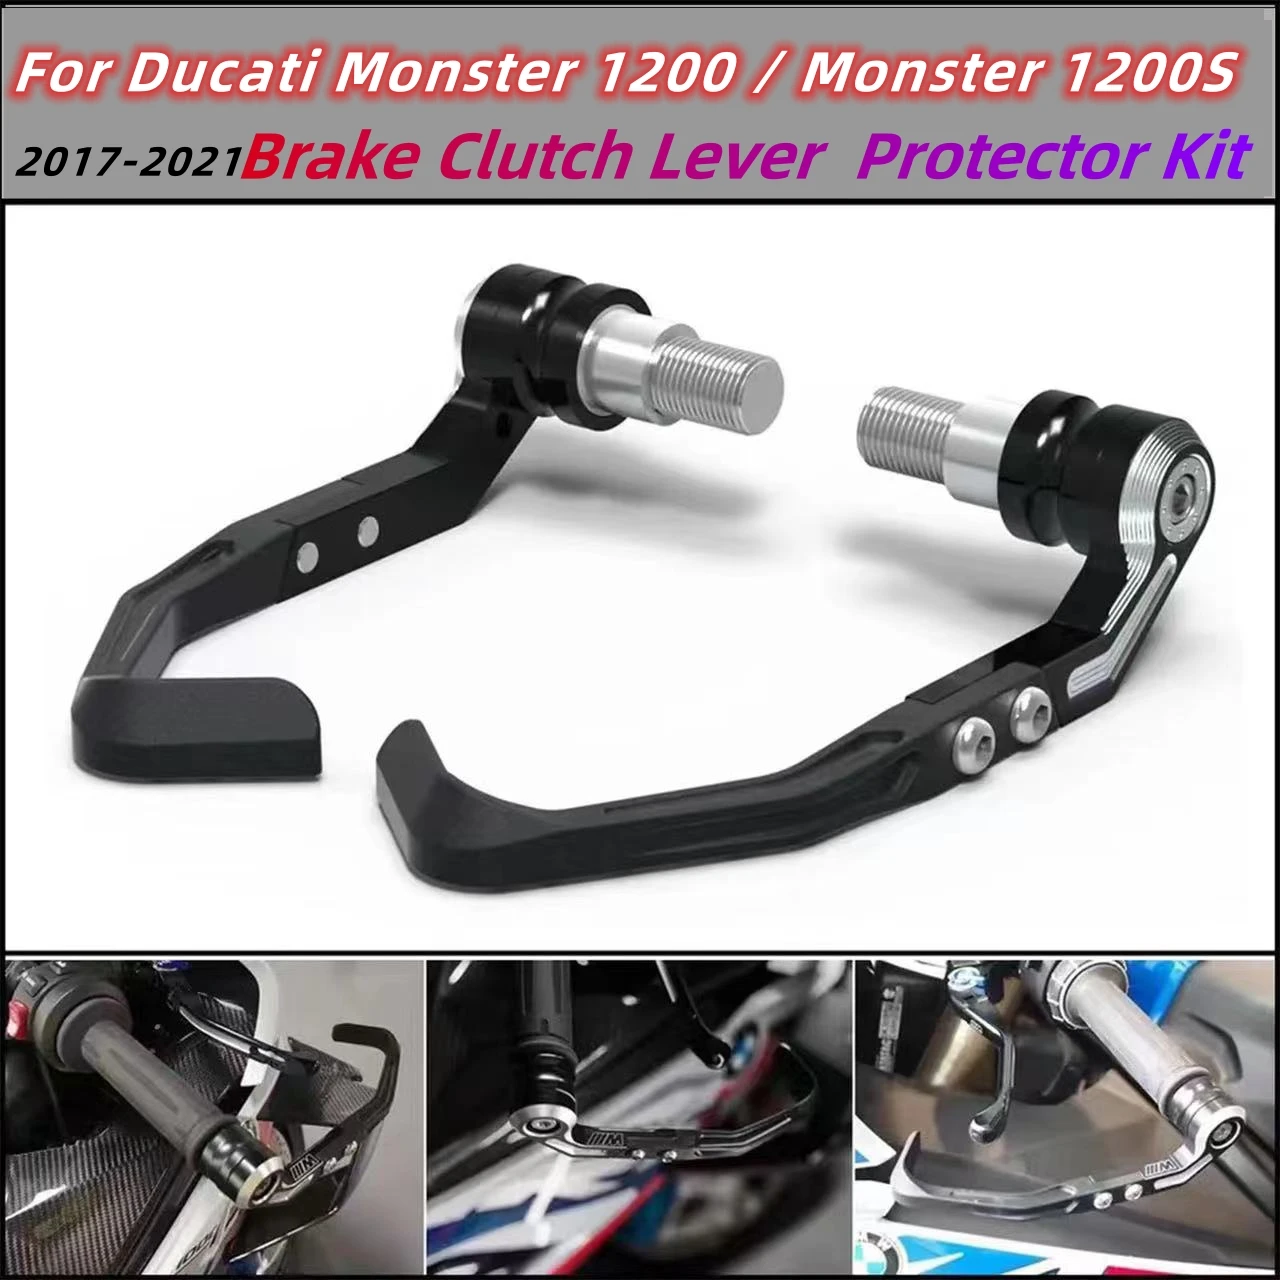 

Motorcycle Brake and Clutch Lever Protector Kit For Ducati Monster 1200 / Monster 1200S 2017-2021